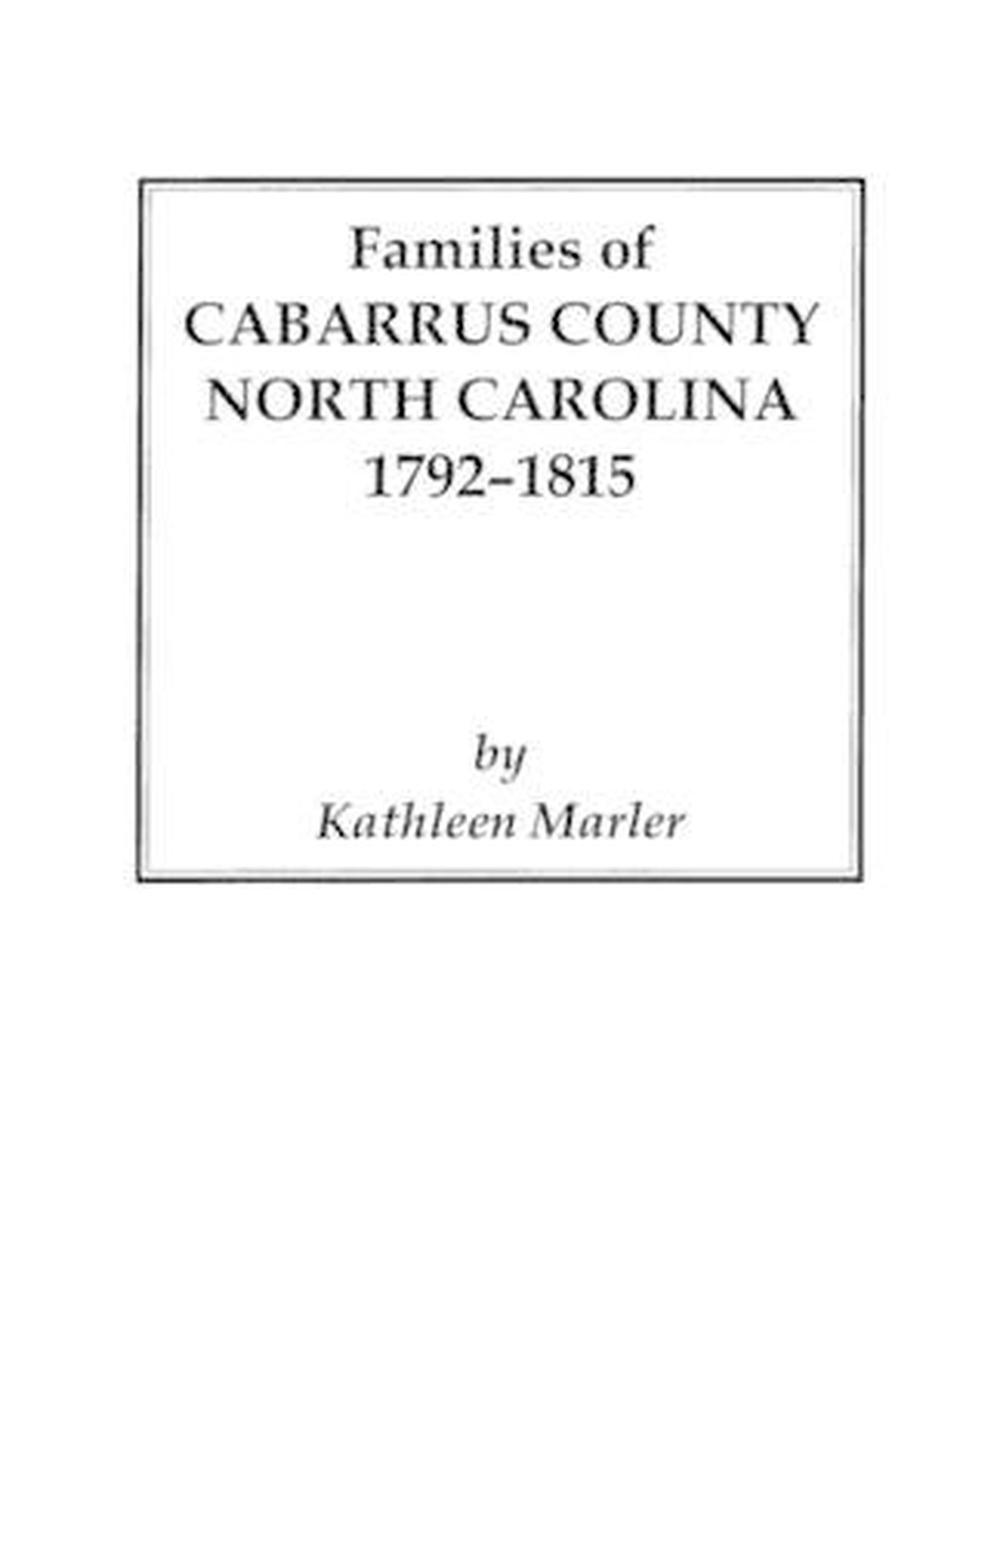 Families of Cabarrus County, North Carolina, 17921815 by Kathleen